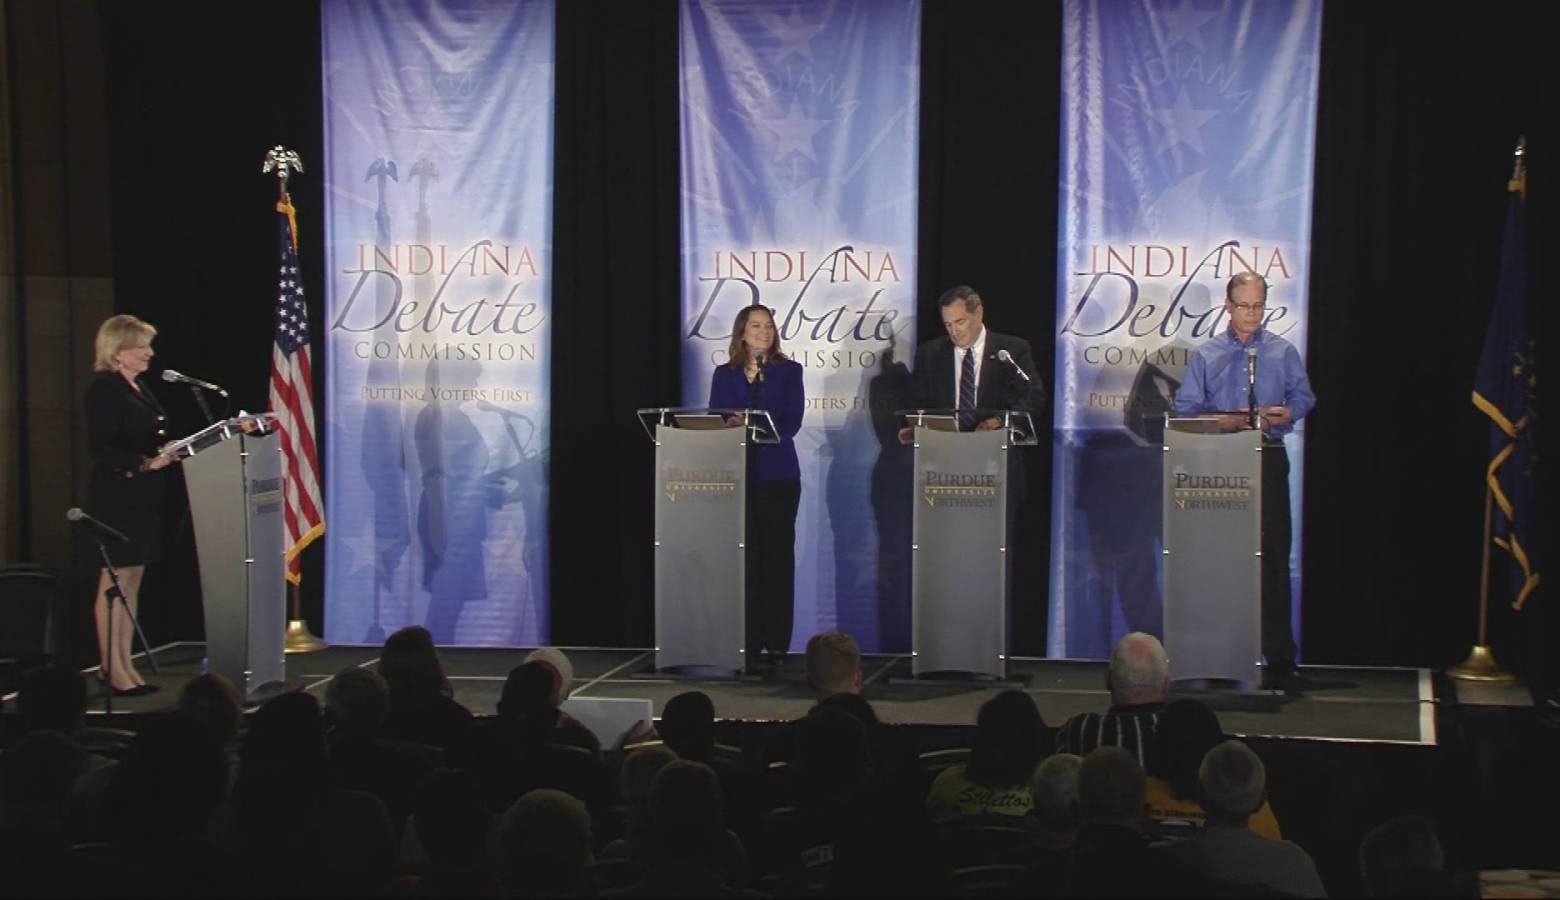 U.S. Senate candidates for Indiana debate on Oct. 8. (Courtesy of the Indiana Debate Commission)